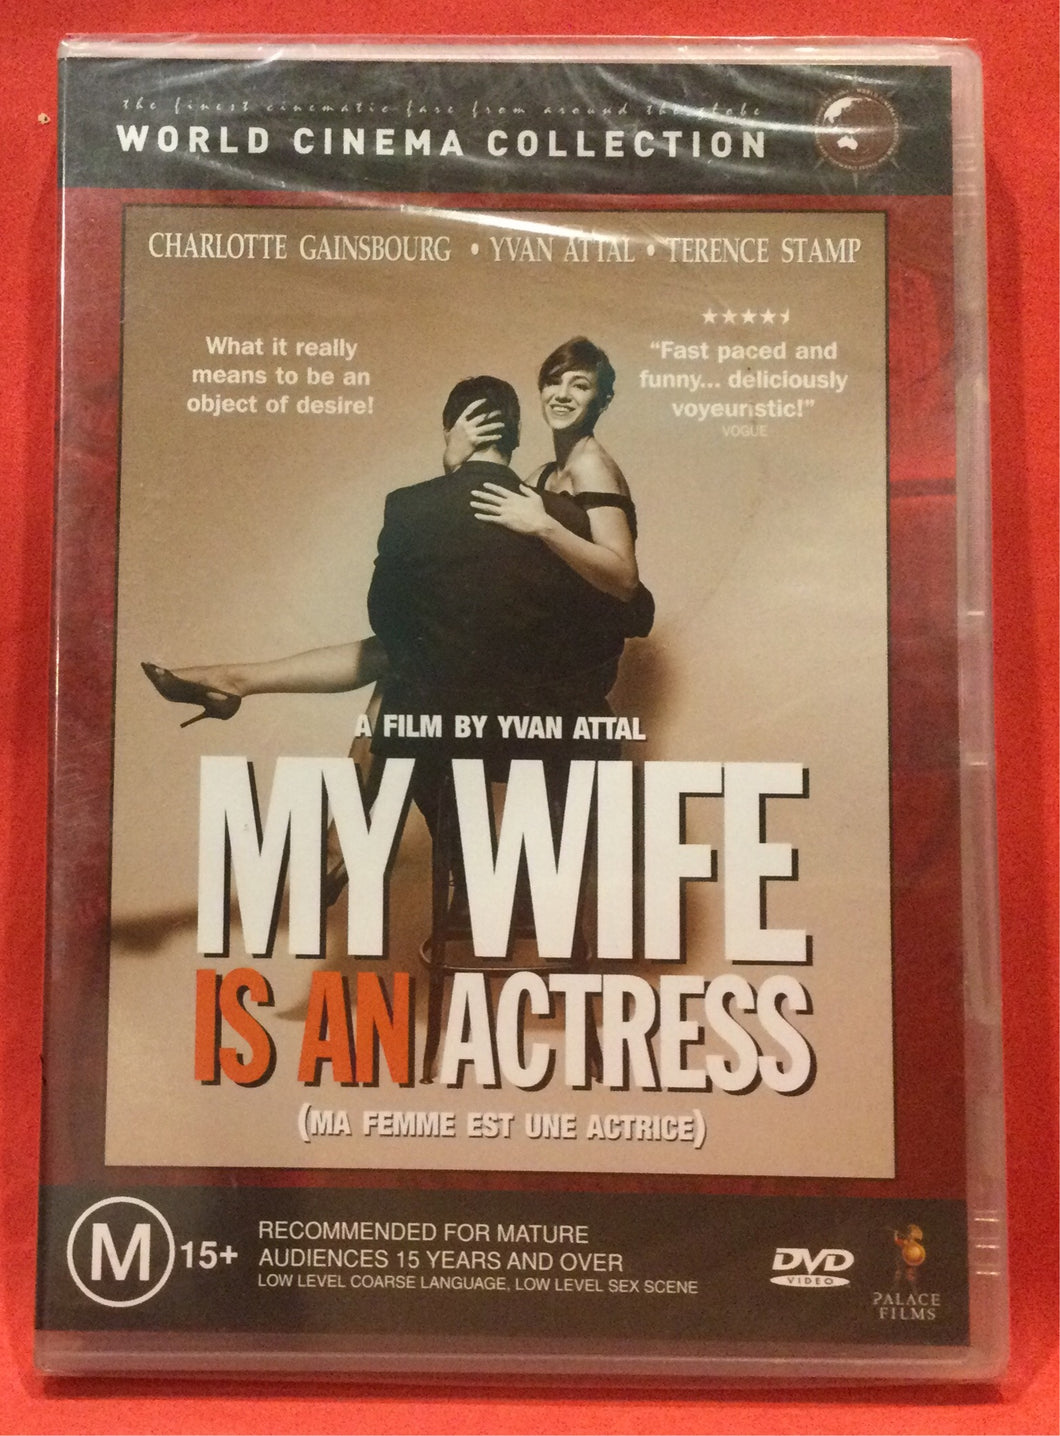 MY WIFE IS AN ACTRESS DVD